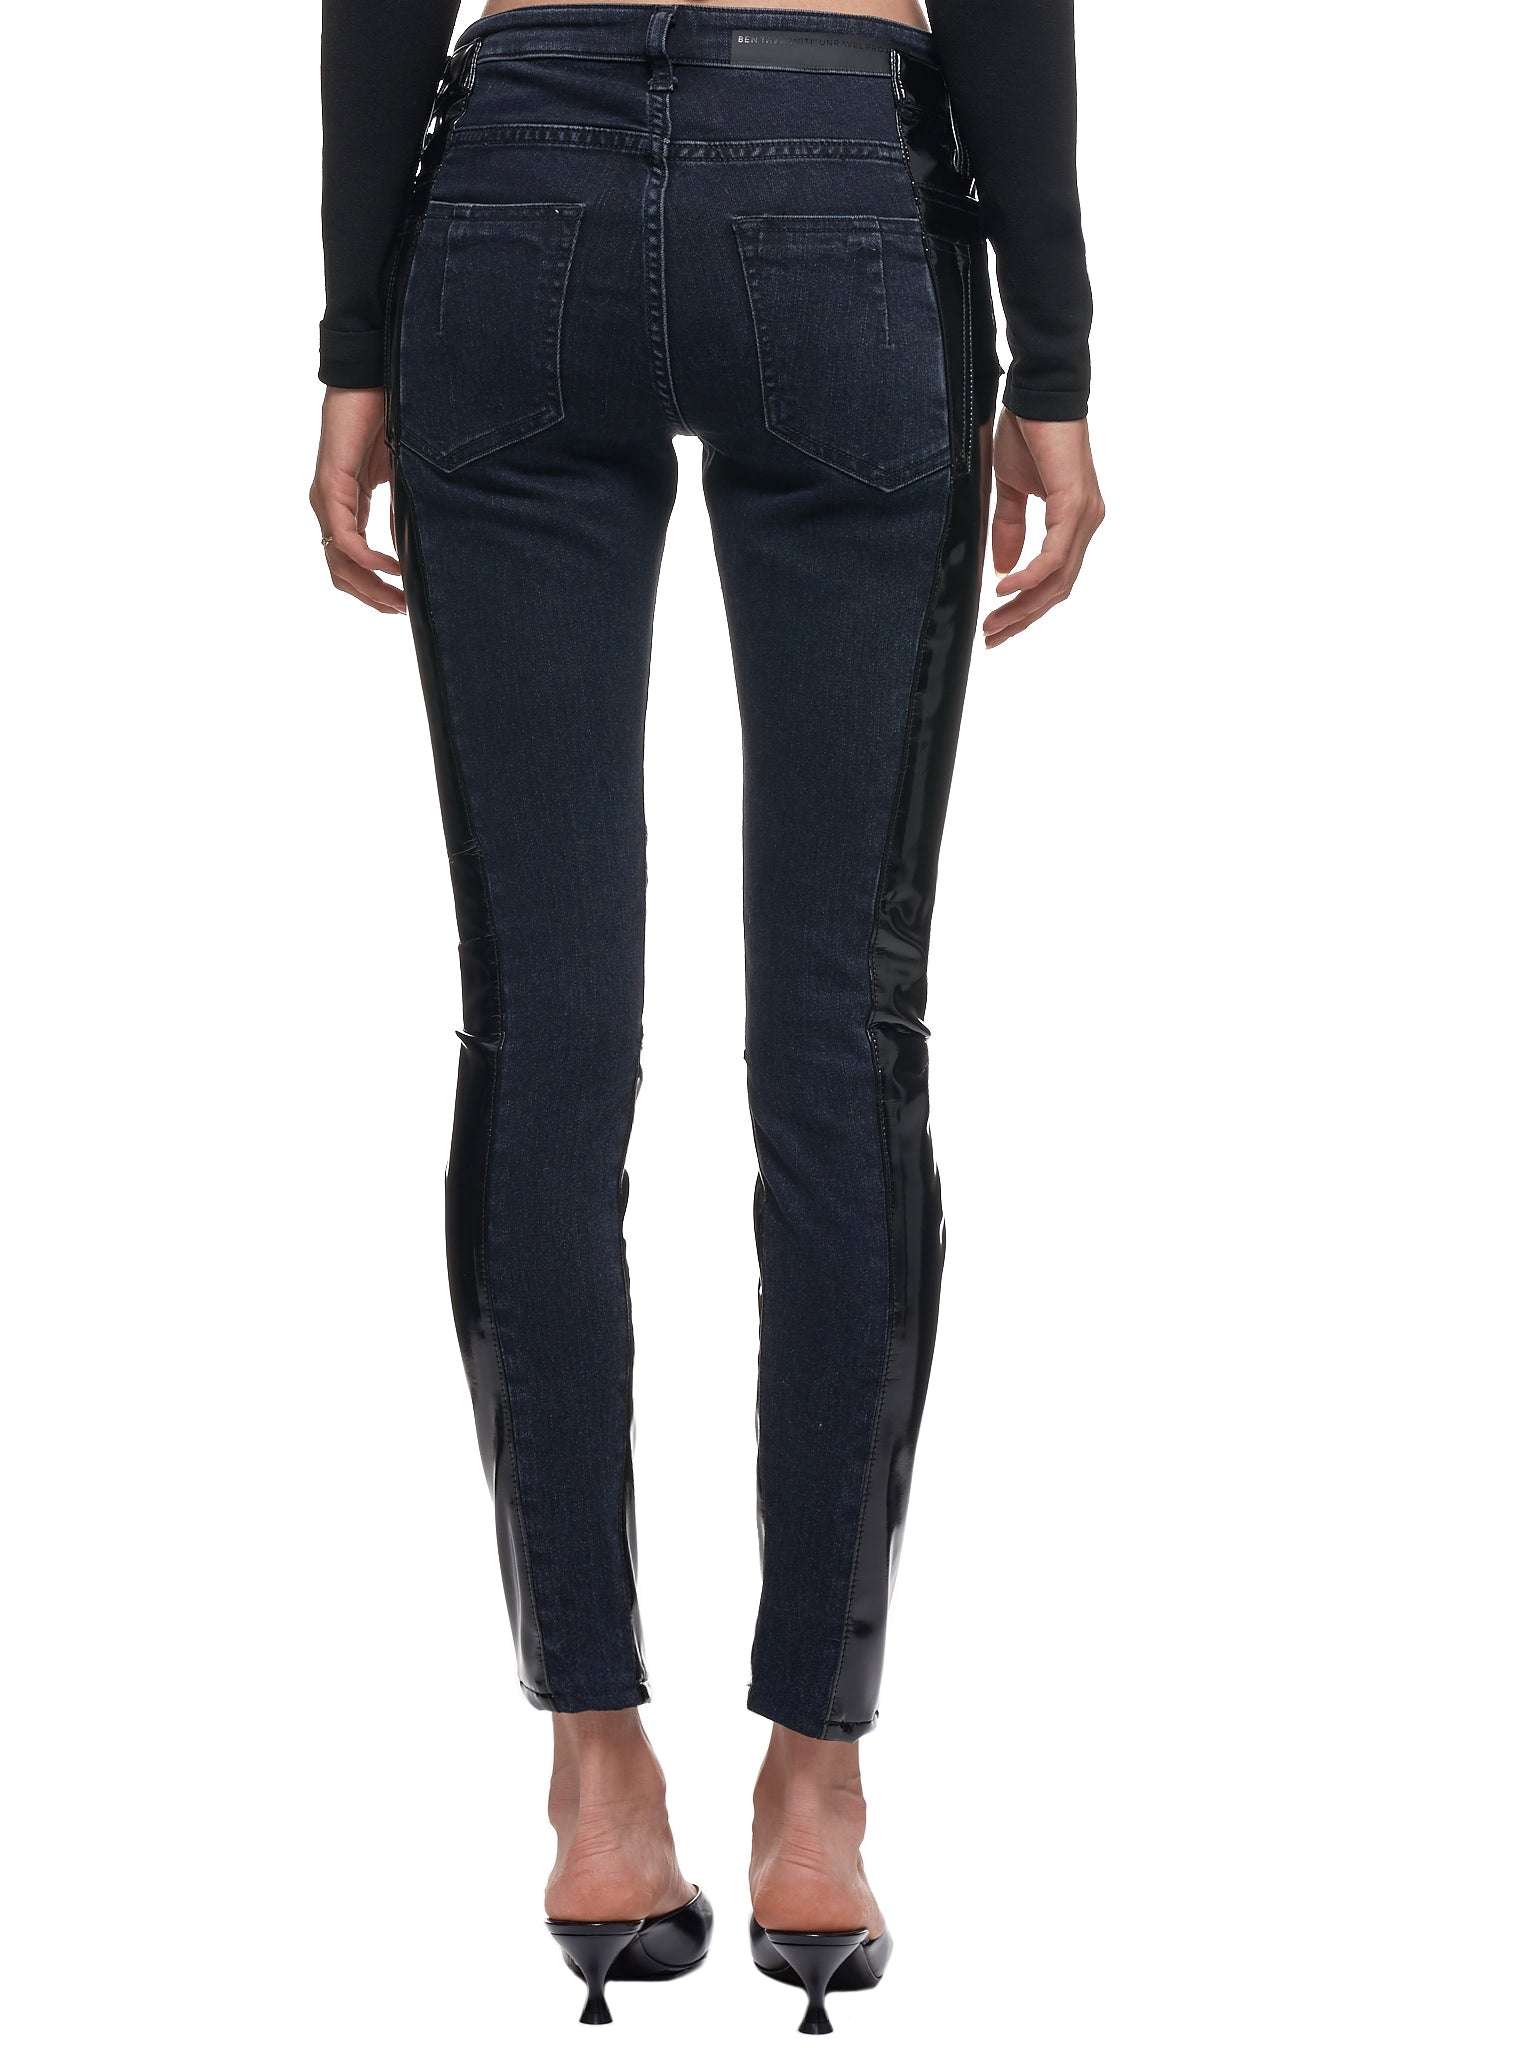 Lace-Up Latex Skinny Jeans (UWYB029-DEN-BLACK)